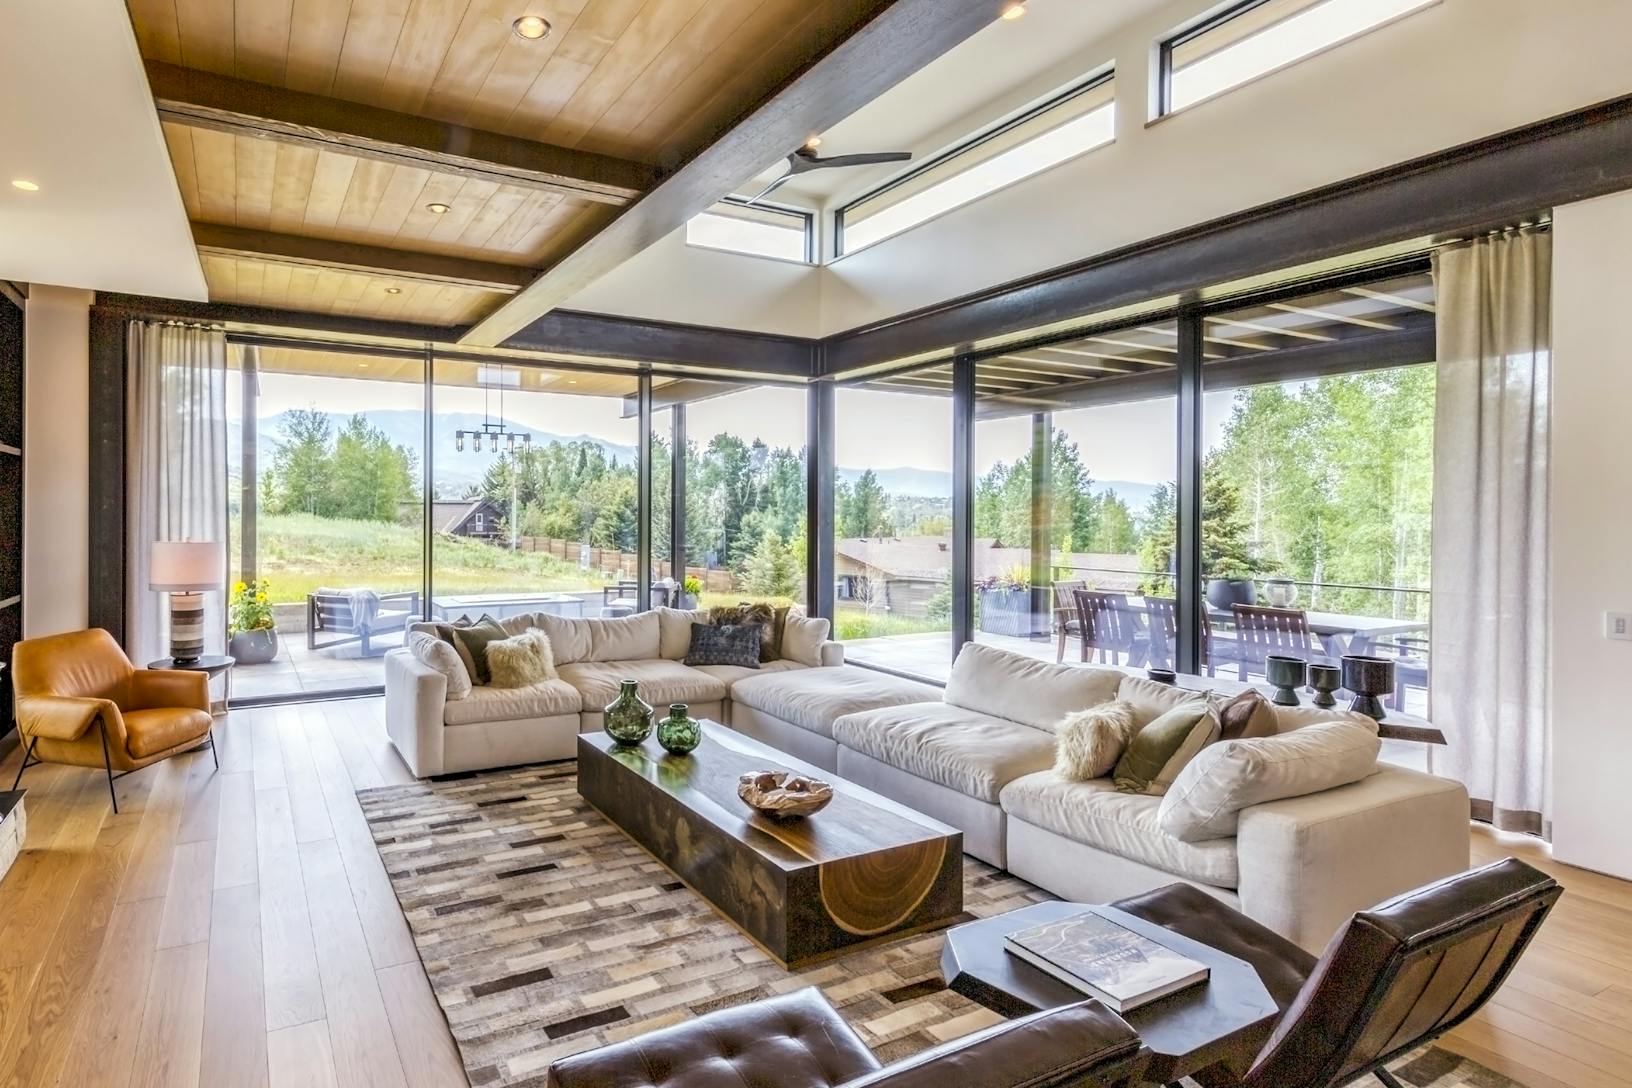 A living room with Large Panel Minimal Sliding Glass Walls, offering breathtaking views of the mountains. A living room with large panel minimal sliding glass walls, offering breathtaking views of the mountains